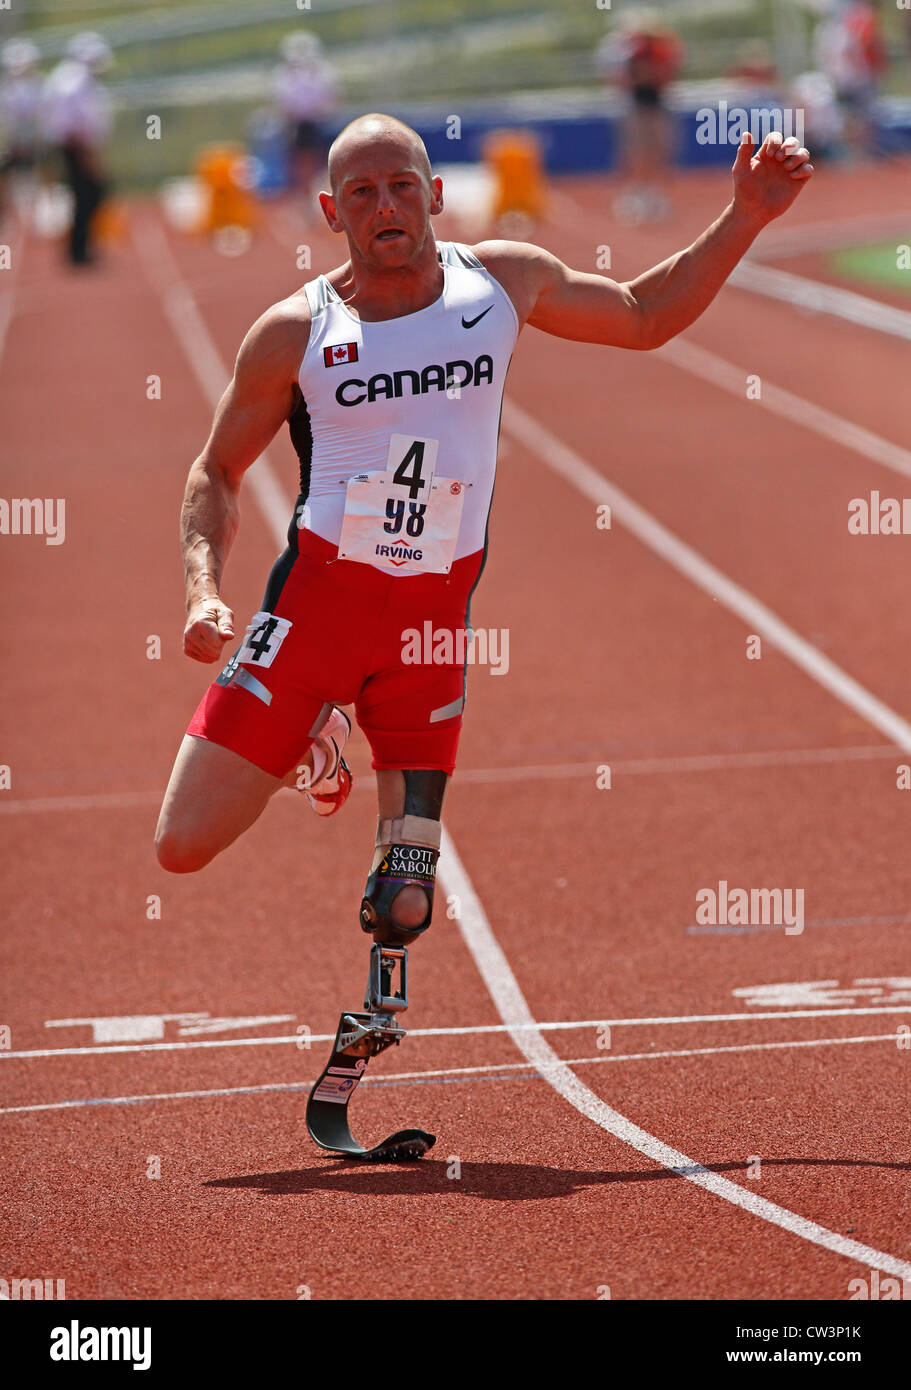 Canadian Paralympic amputee sprinter Earle Connor races at the 2012 NCCWMA & CMA Track & Field Championships. Stock Photo